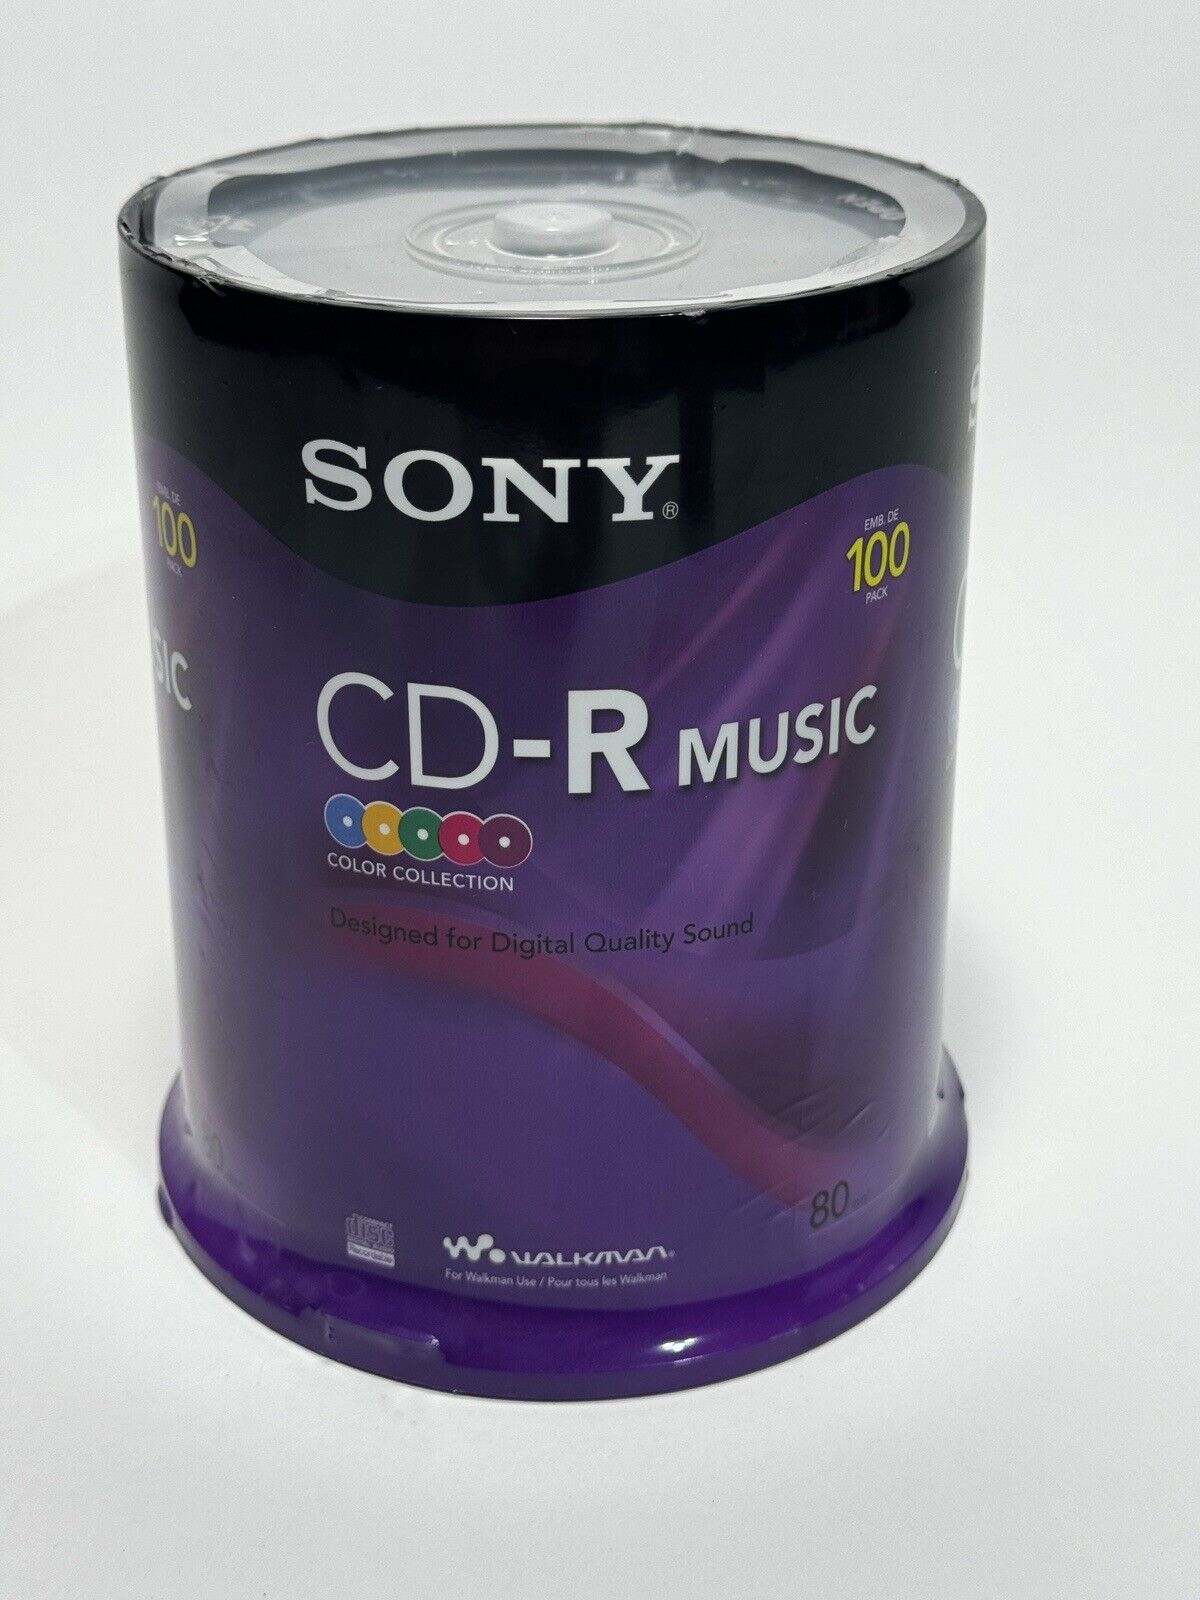 SONY CD-R Music Discs, 100 ct. 80 min. Color Collection. For Walkman Use.